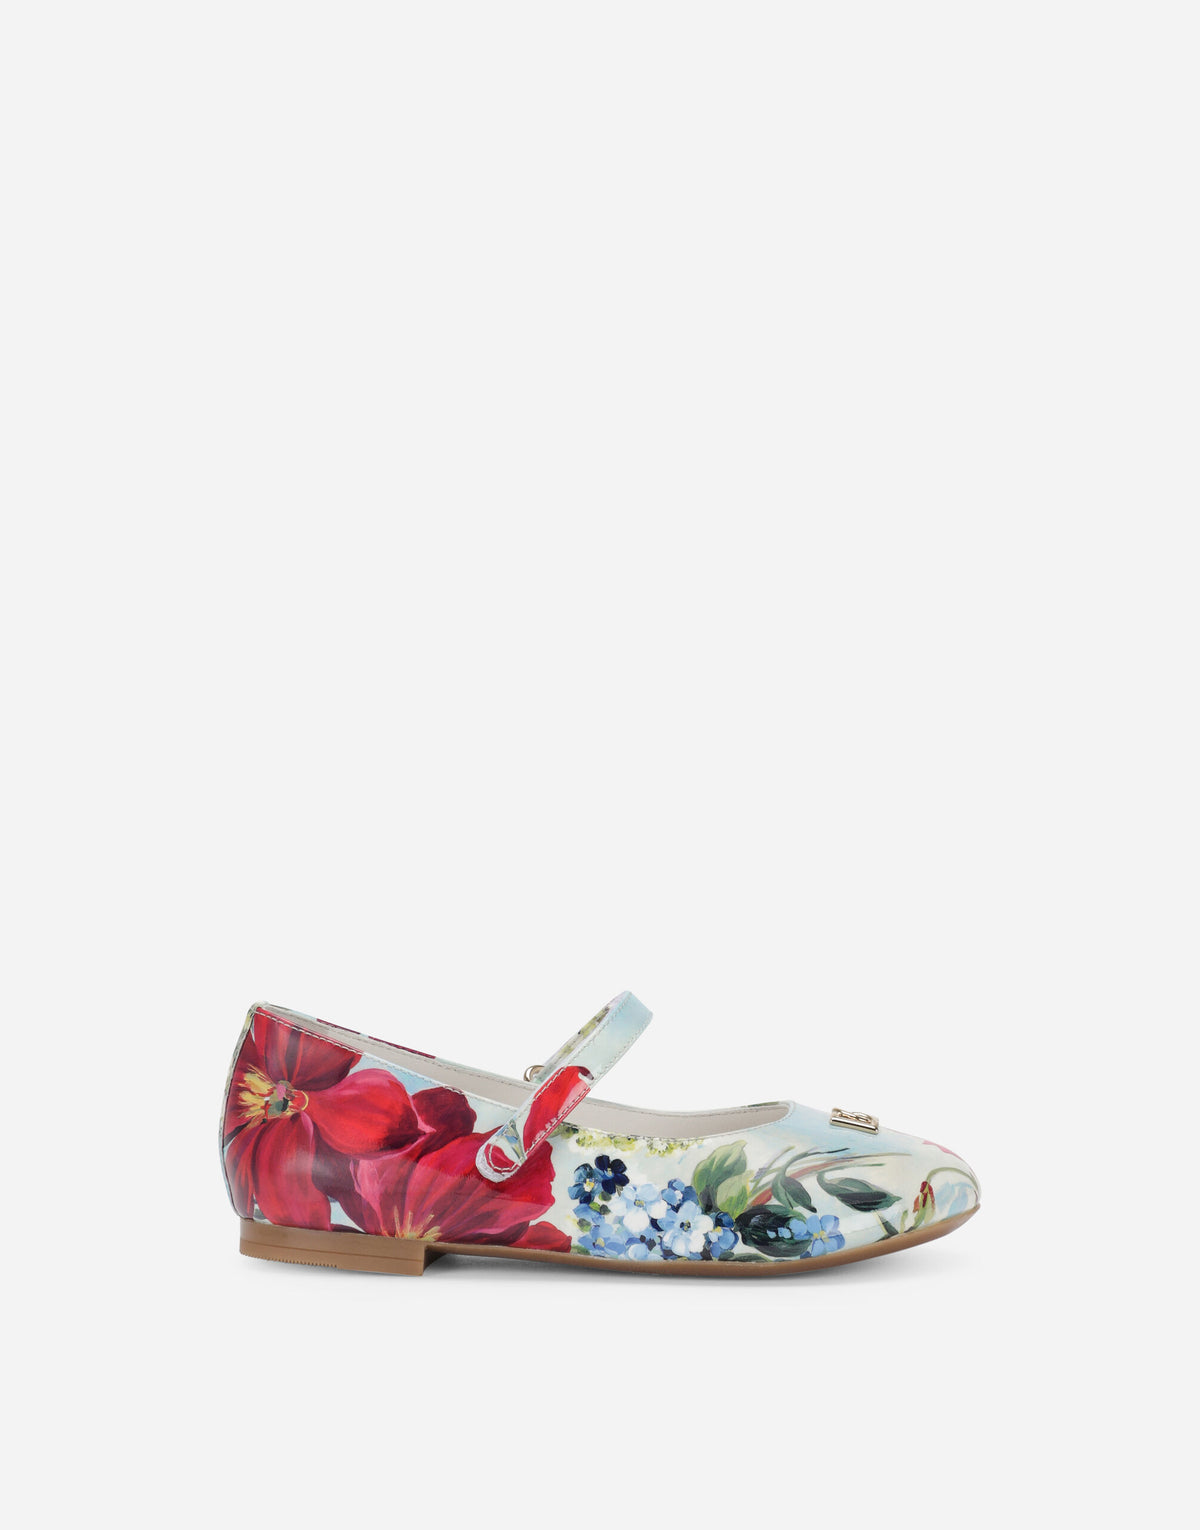 Patent Leather Mary Janes With Garden Print